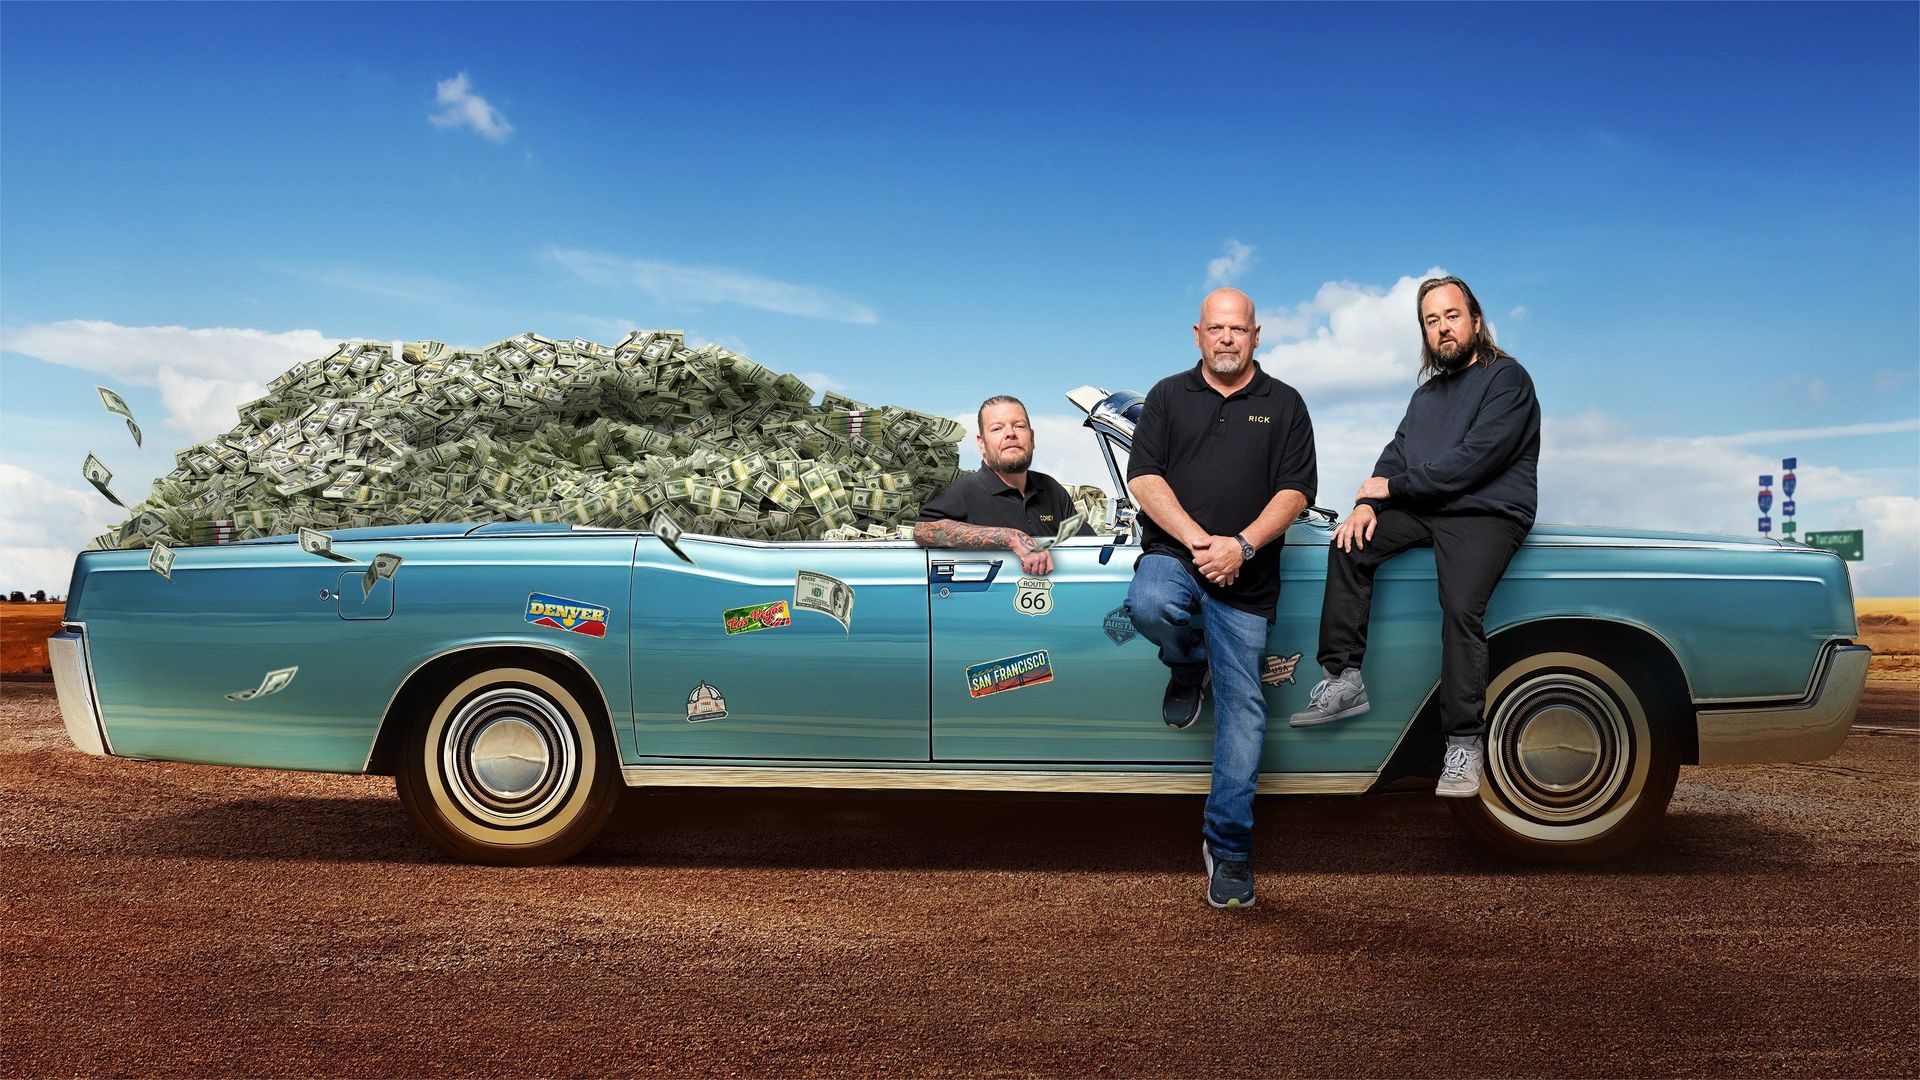 Pawn Stars Do America - Where to Watch and Stream - TV Guide